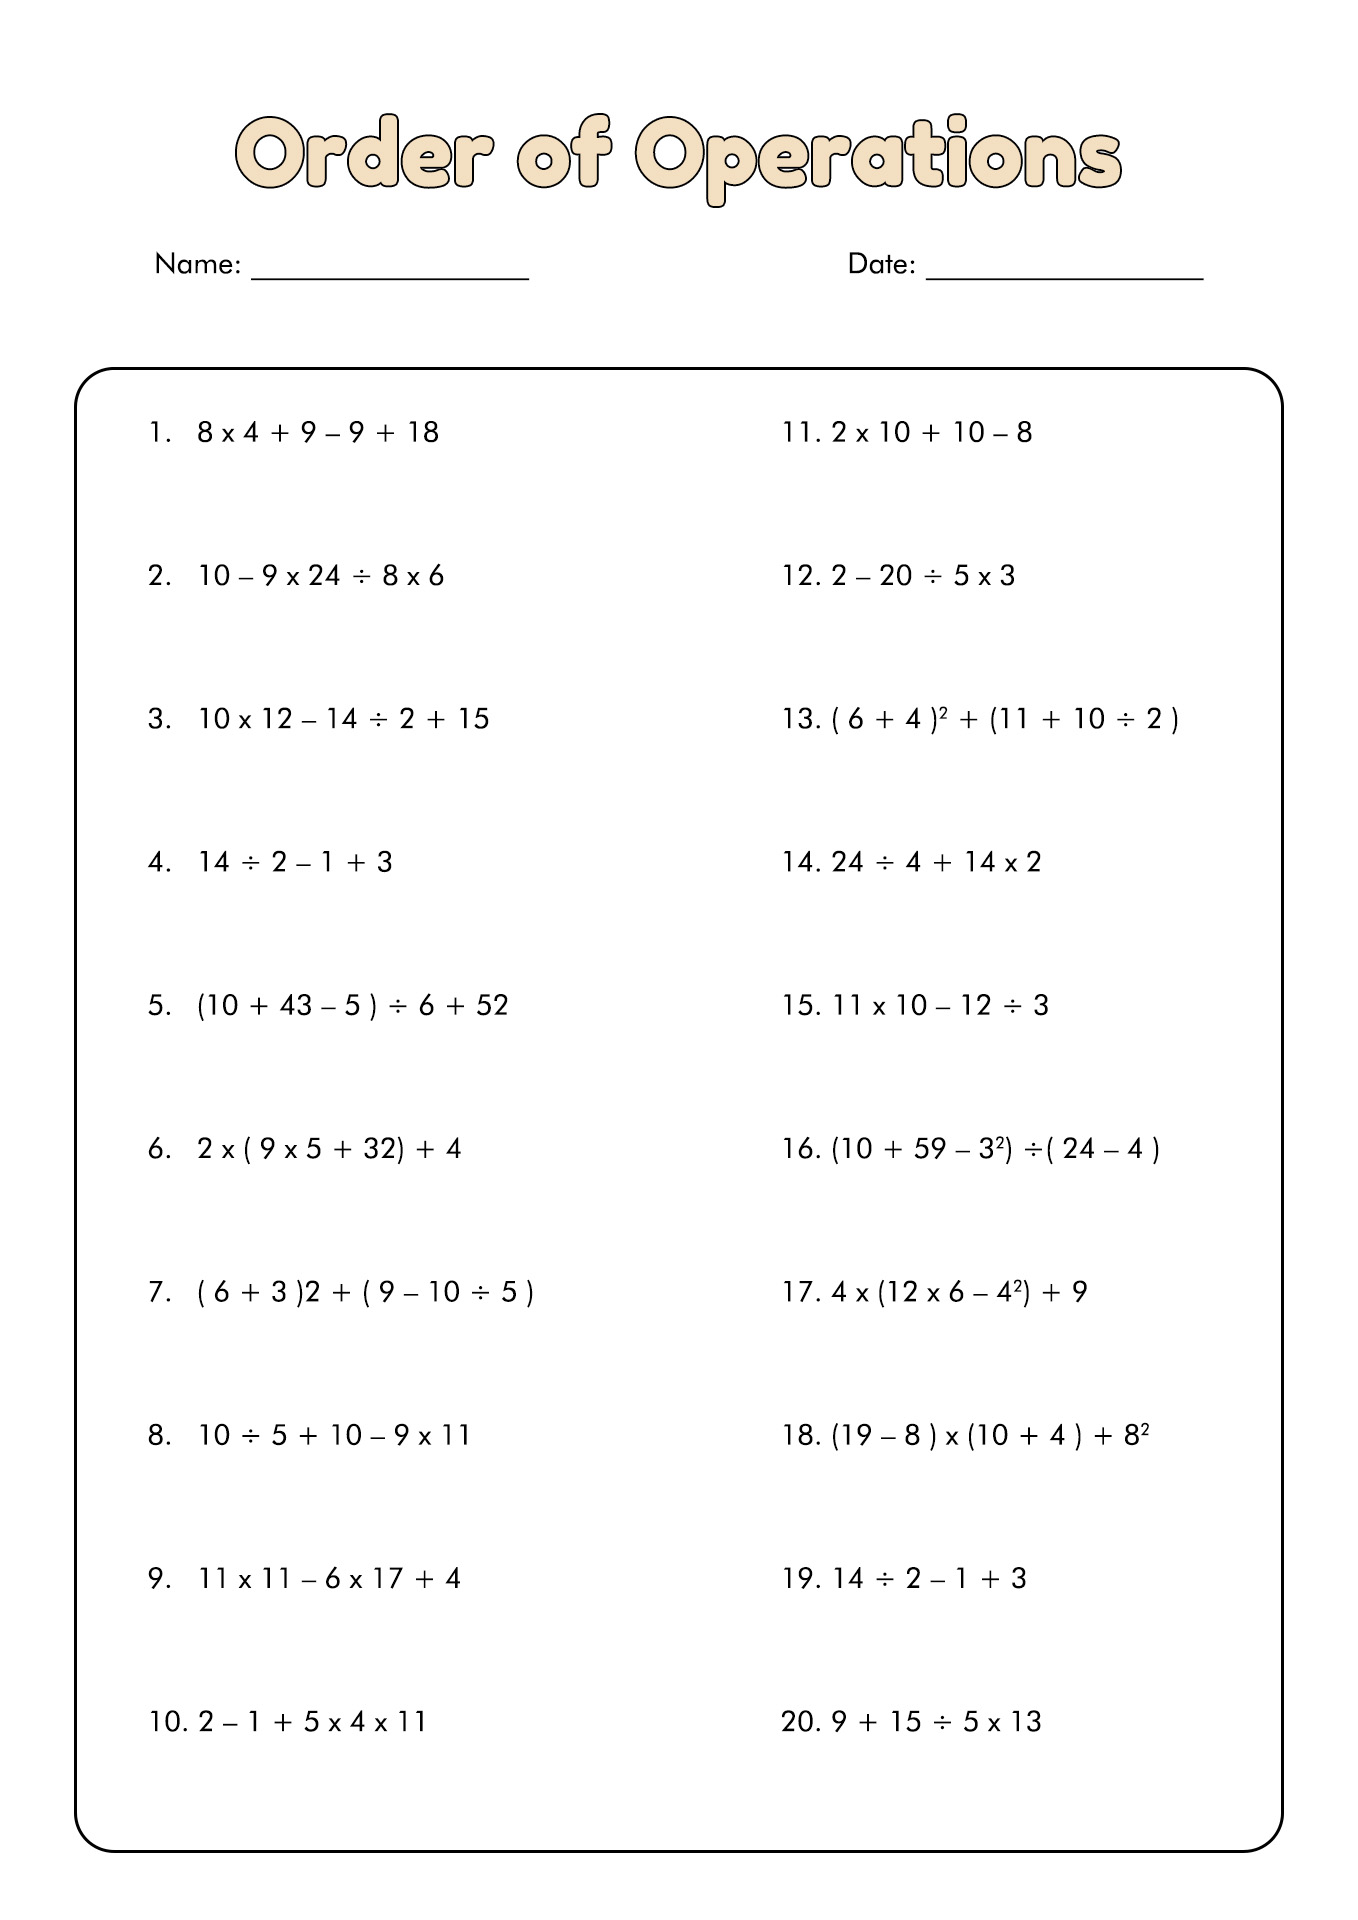 Order of Operations Worksheets 6th Grade